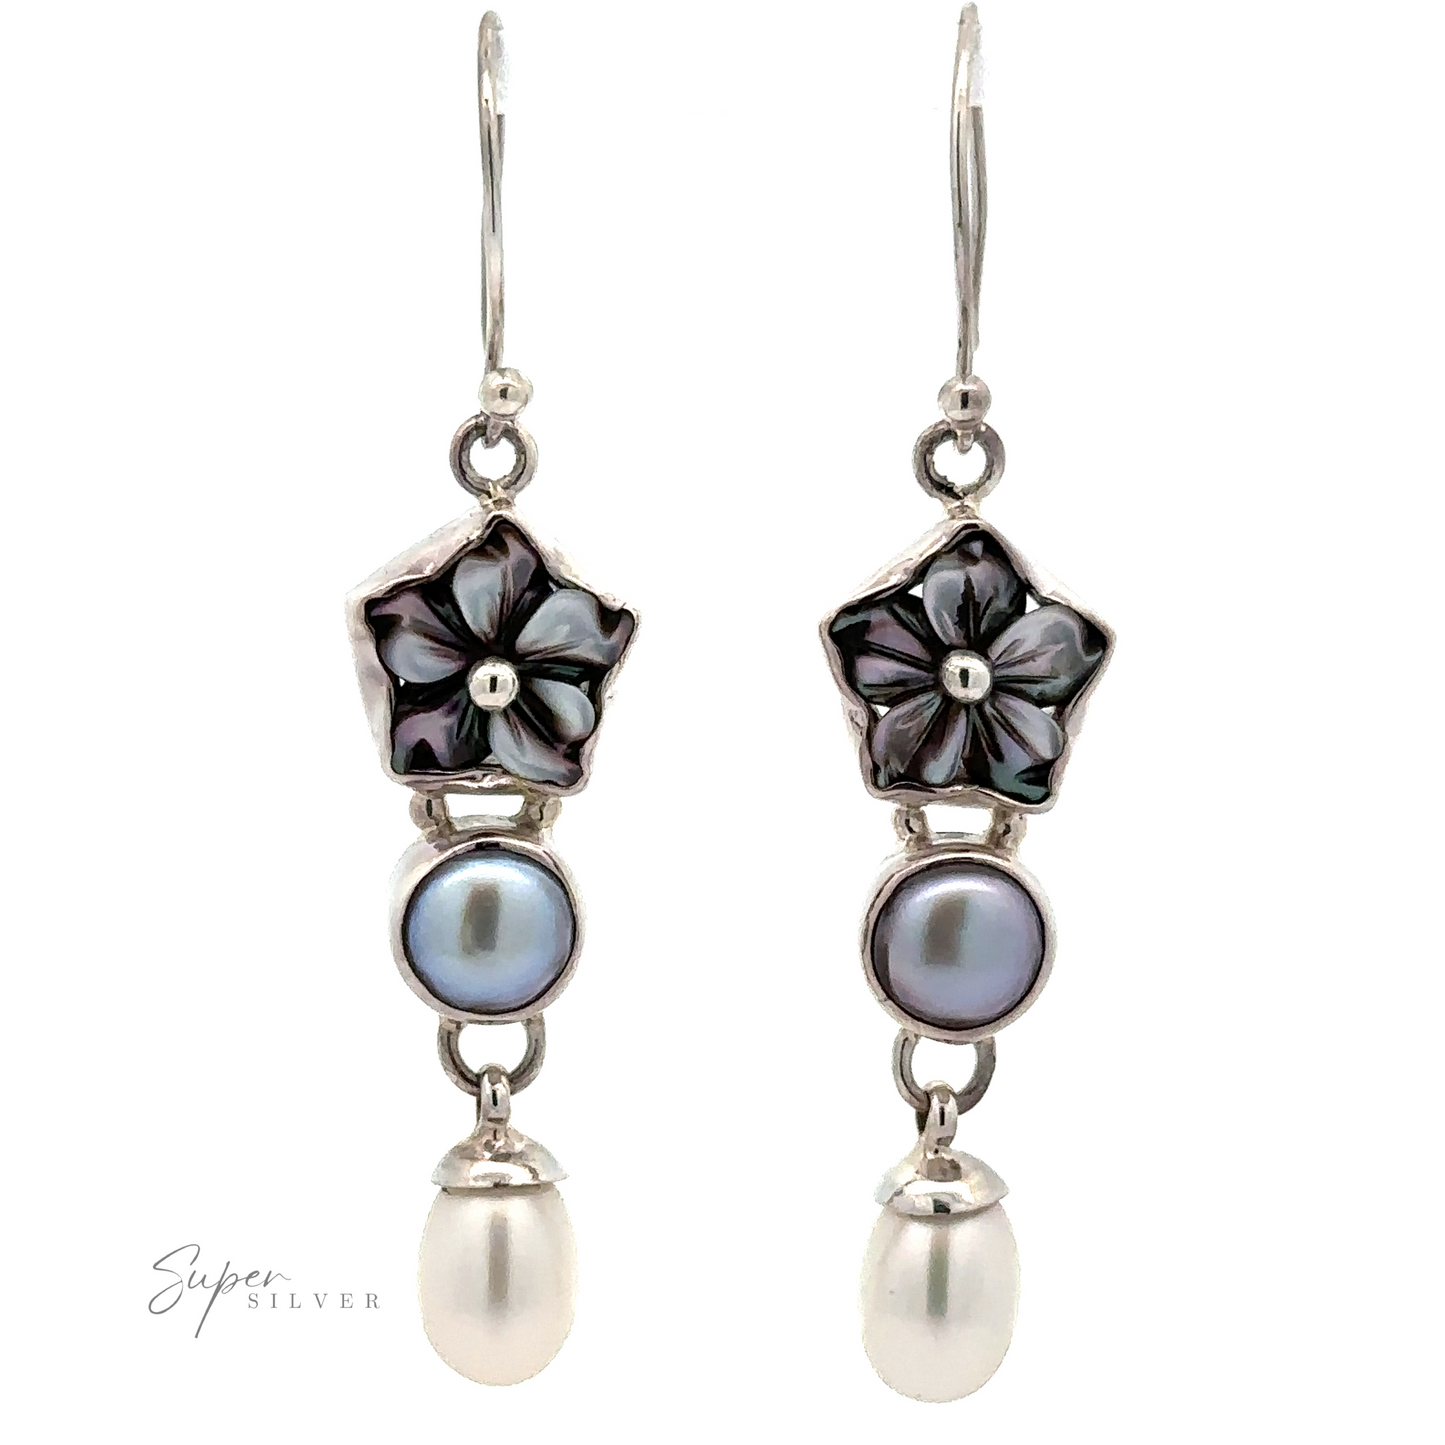 A pair of Floral Pearl Bead Earrings featuring black flower designs, round blue gems, and white teardrop-shaped pearls.